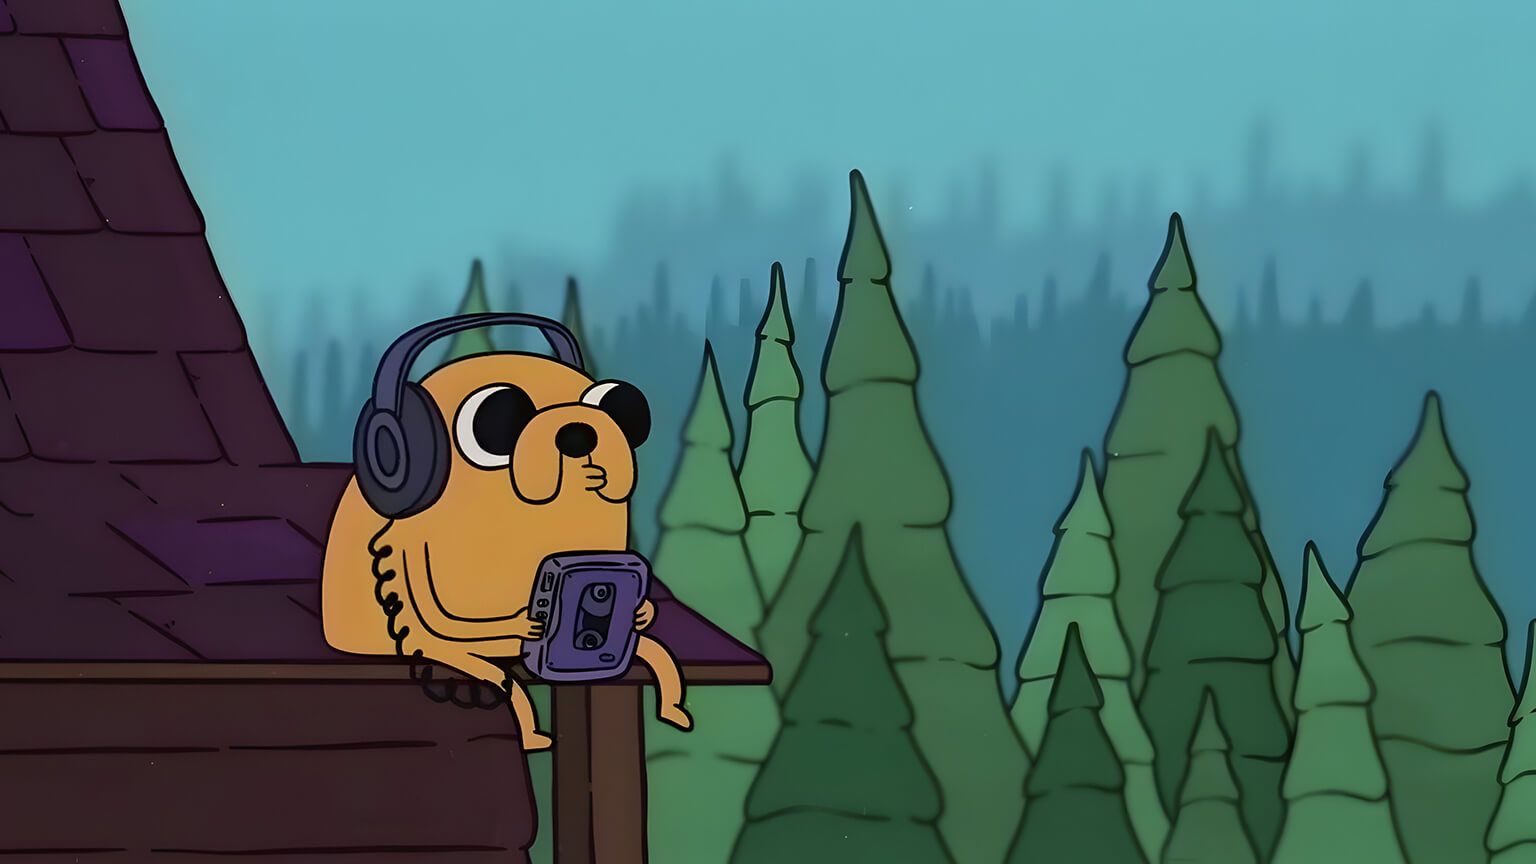 Jake the Dog listening to music on a portable radio - Adventure Time